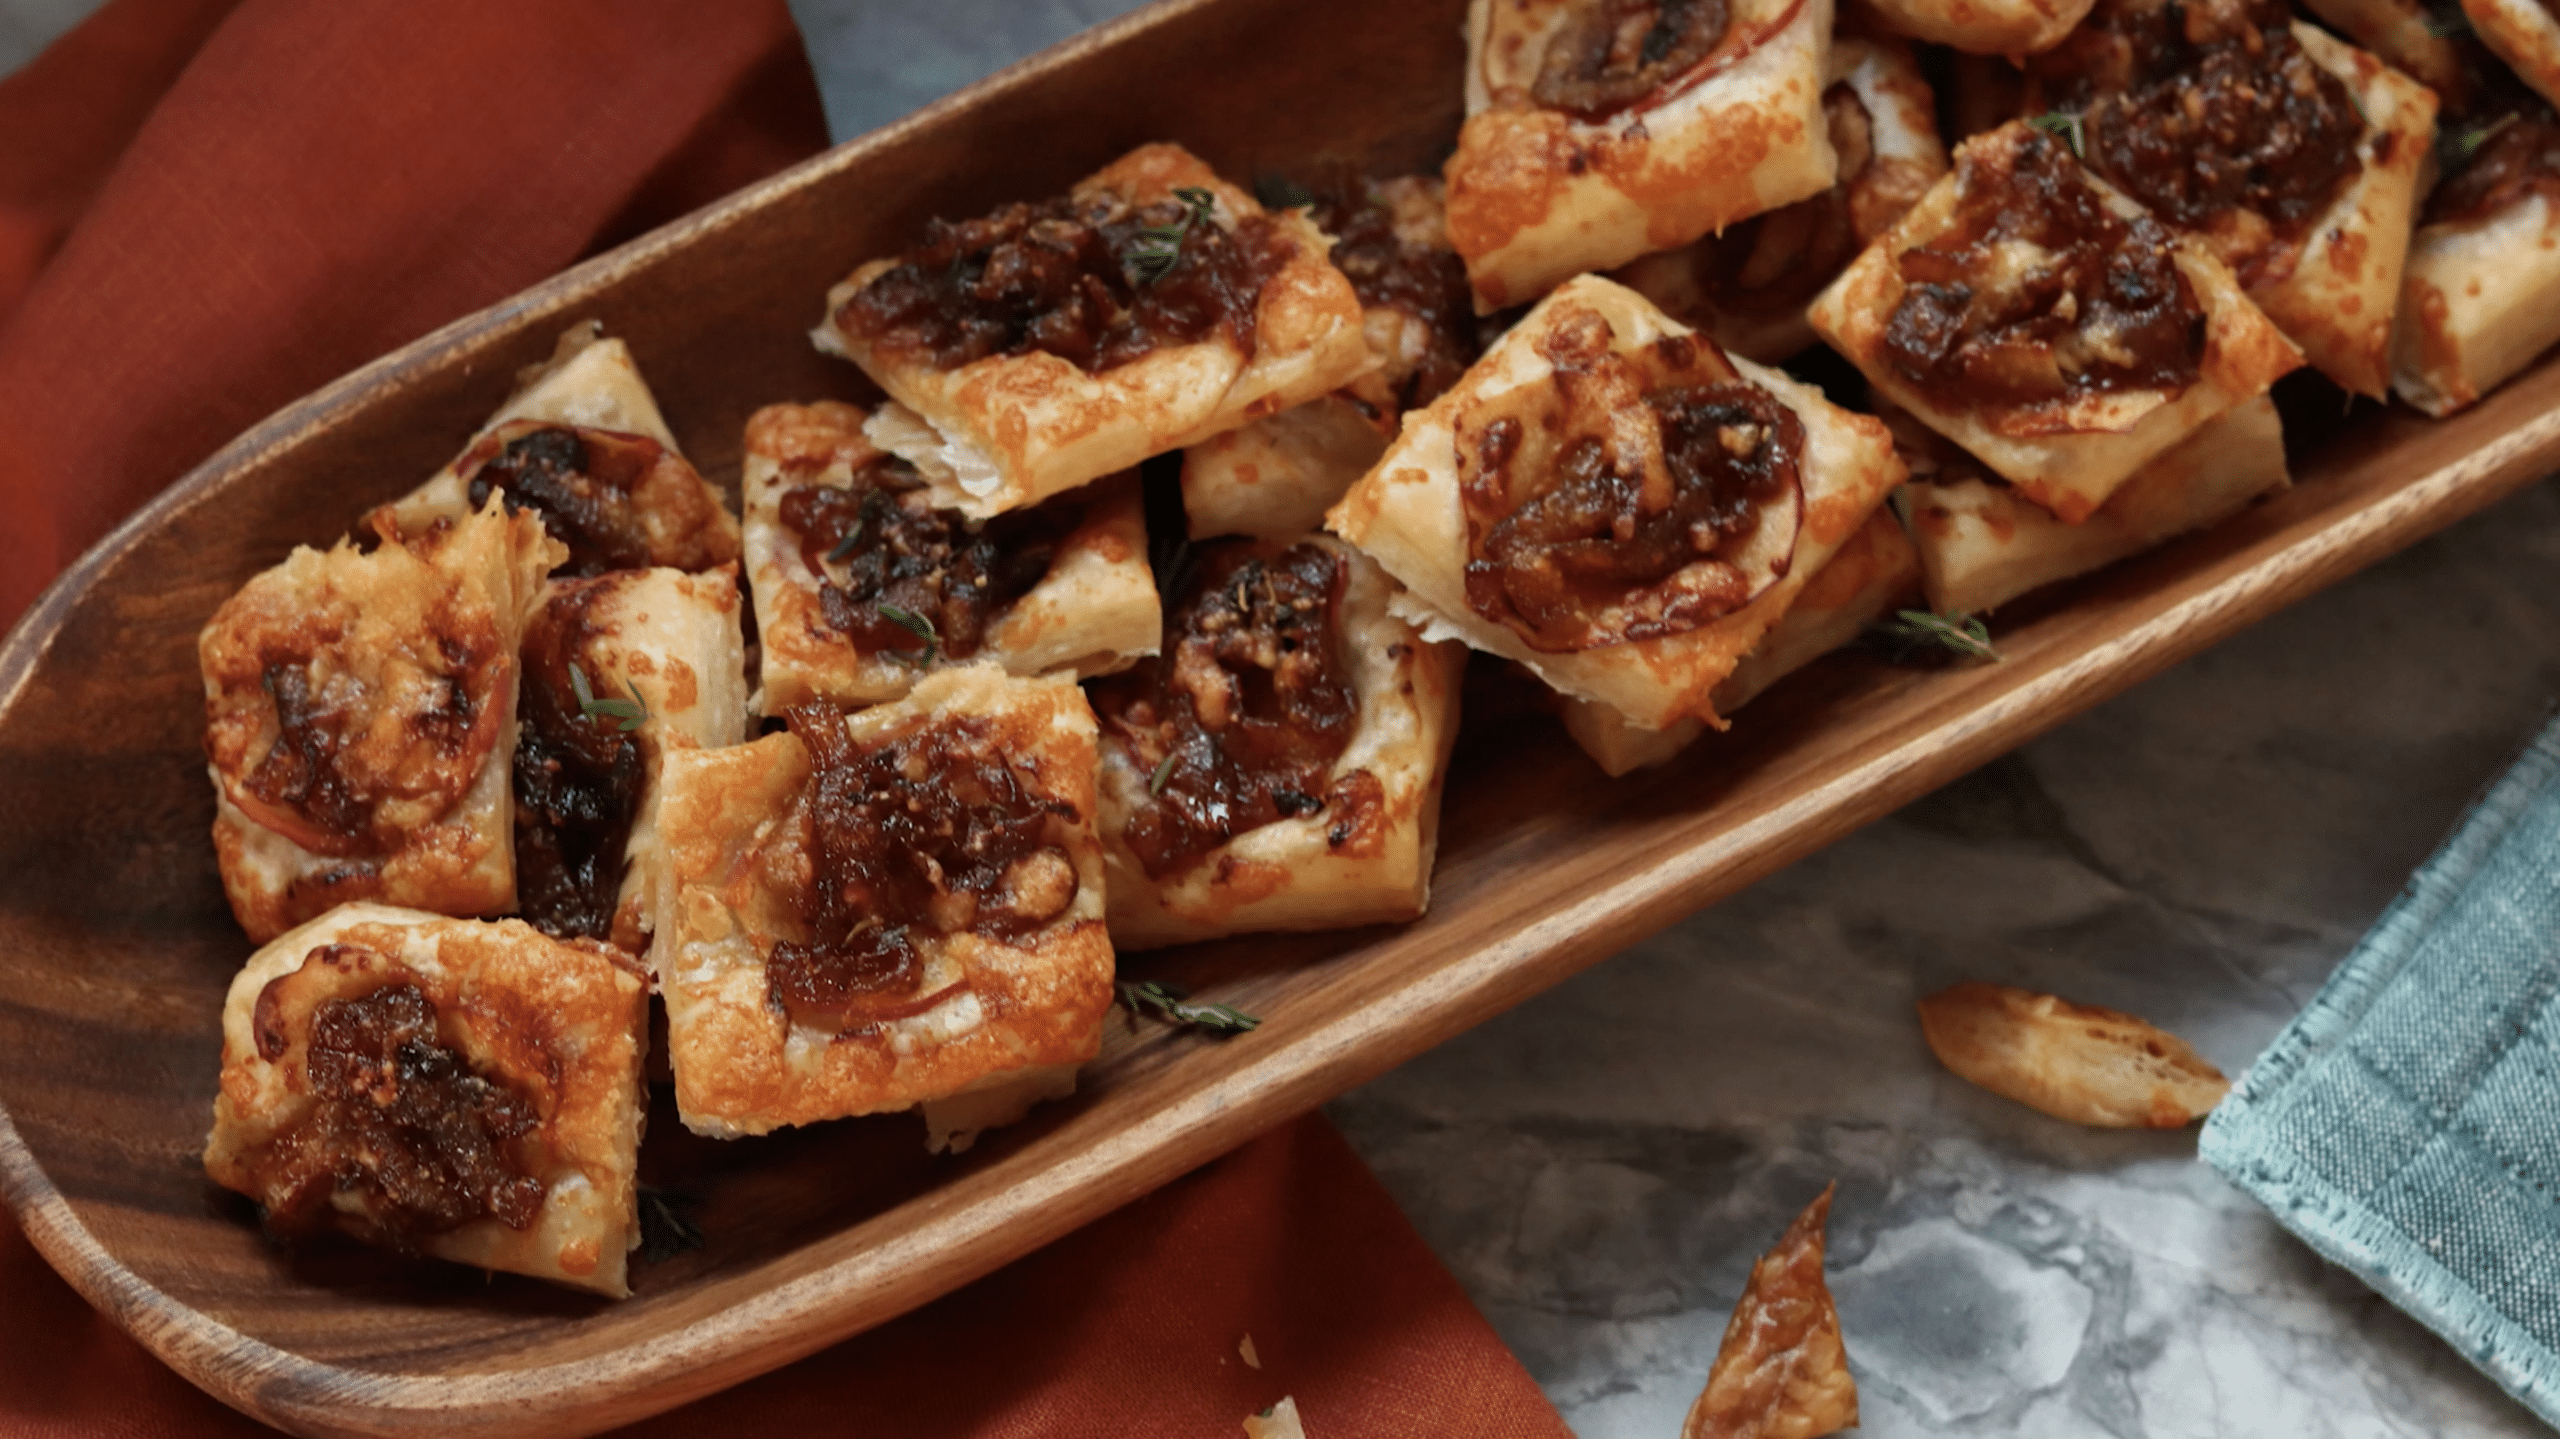 Apple, Cheddar, and Caramelized Onion Pastry Bites